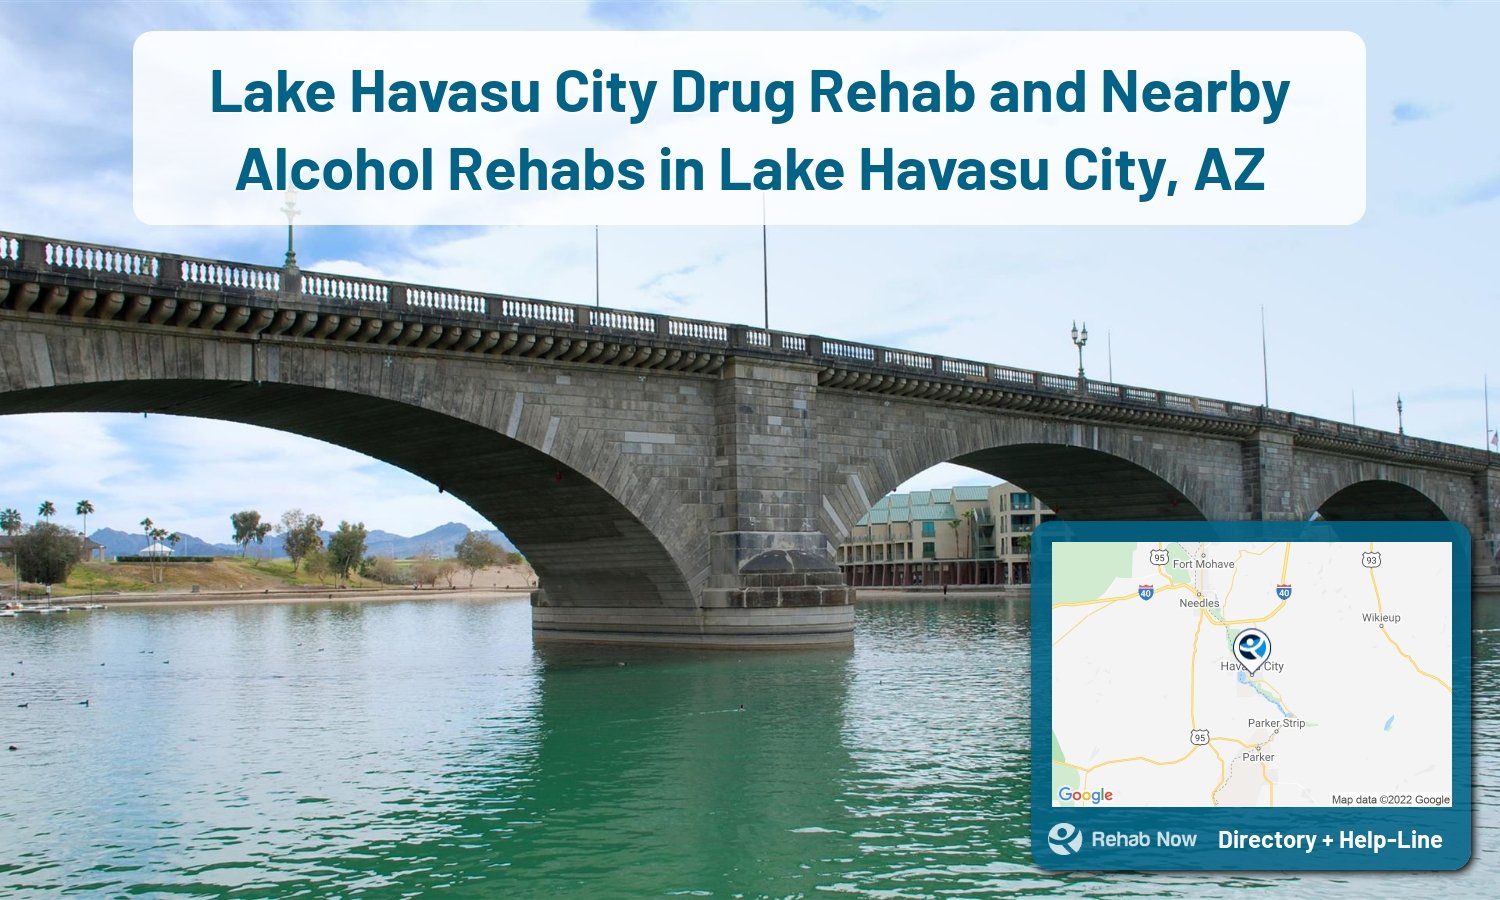 Ready to pick a rehab center in Lake Havasu City? Get off alcohol, opiates, and other drugs, by selecting top drug rehab centers in Arizona